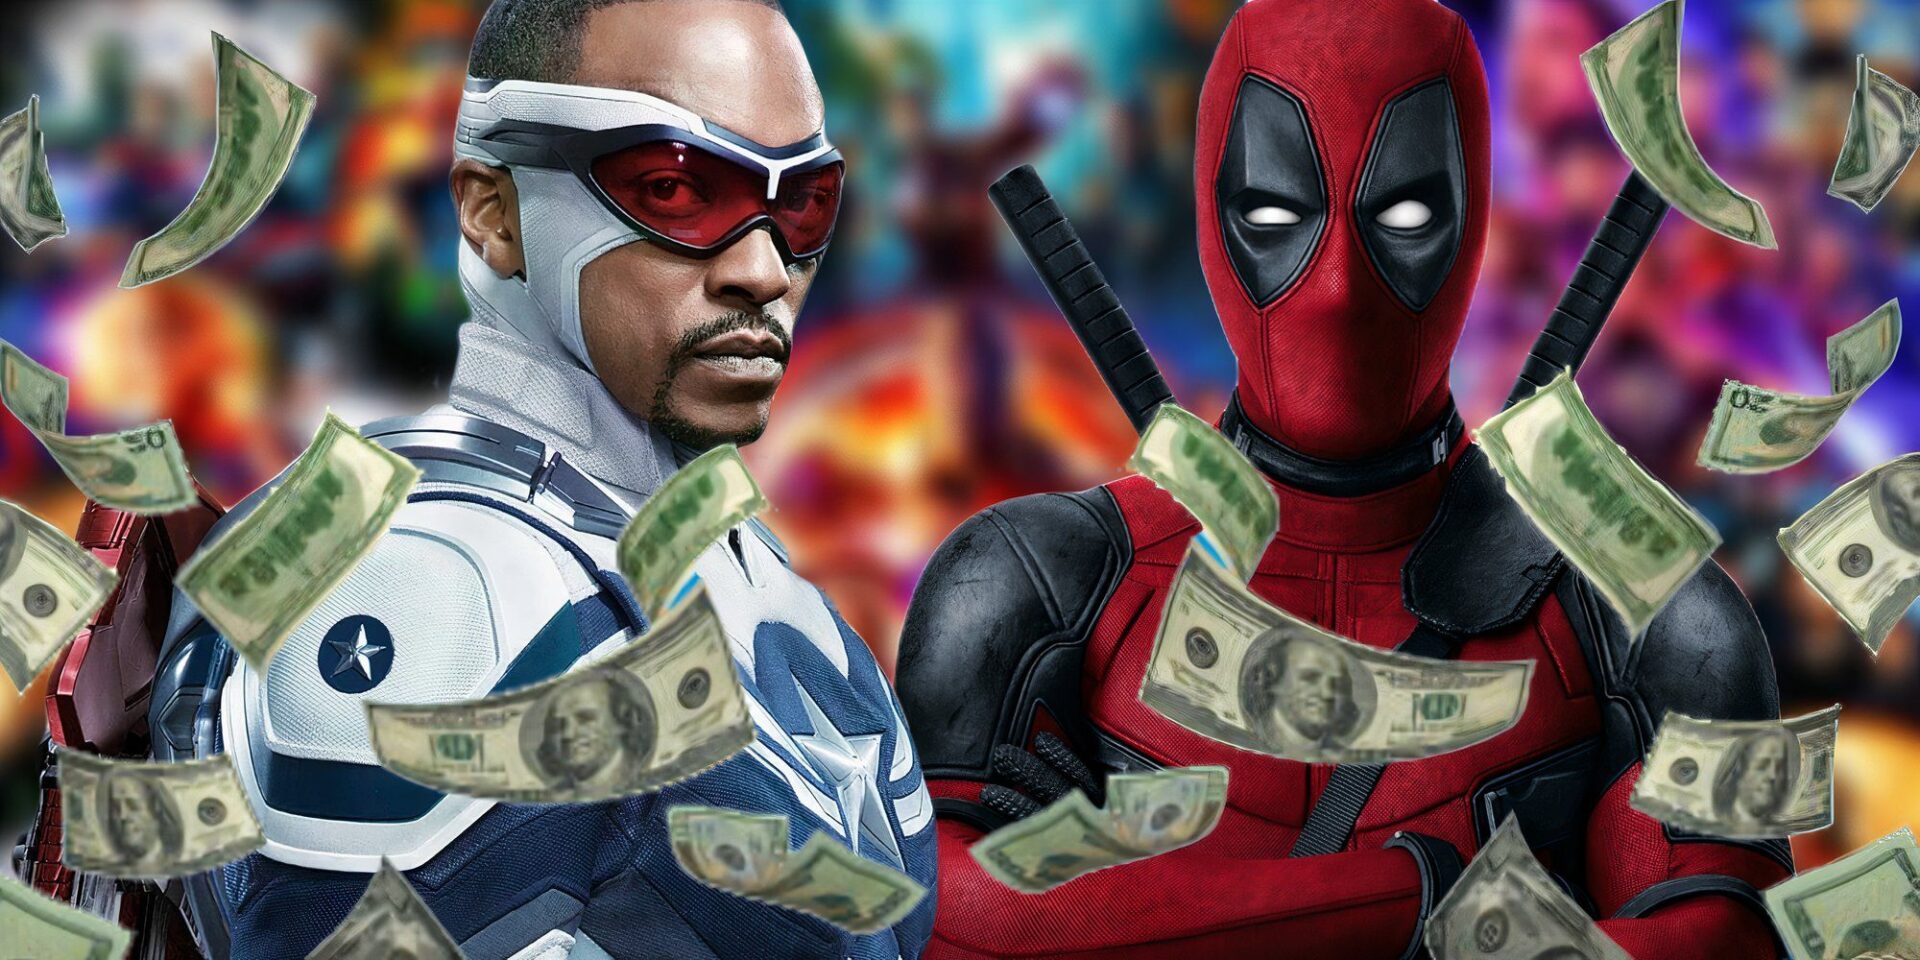 All Upcoming MCU Movies Ranked By How Likely They Are To Hit $1 Billion